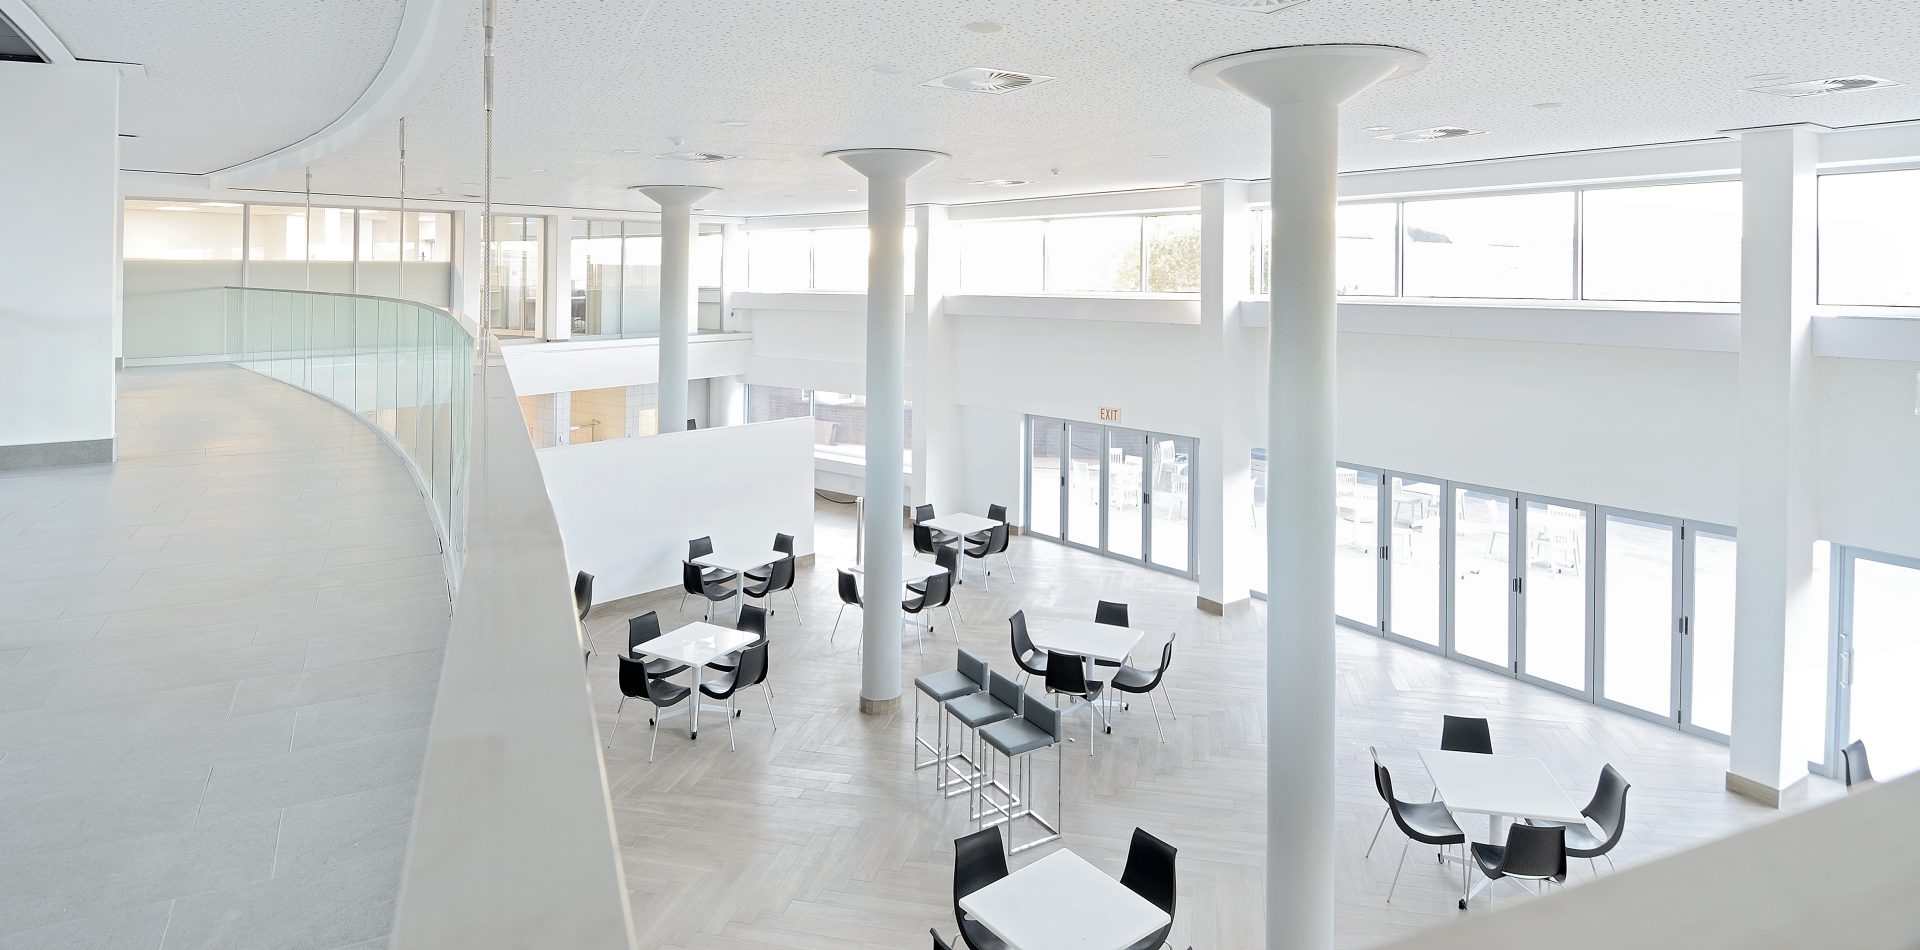 This picture shows an Interior view of the Midrand Campus.